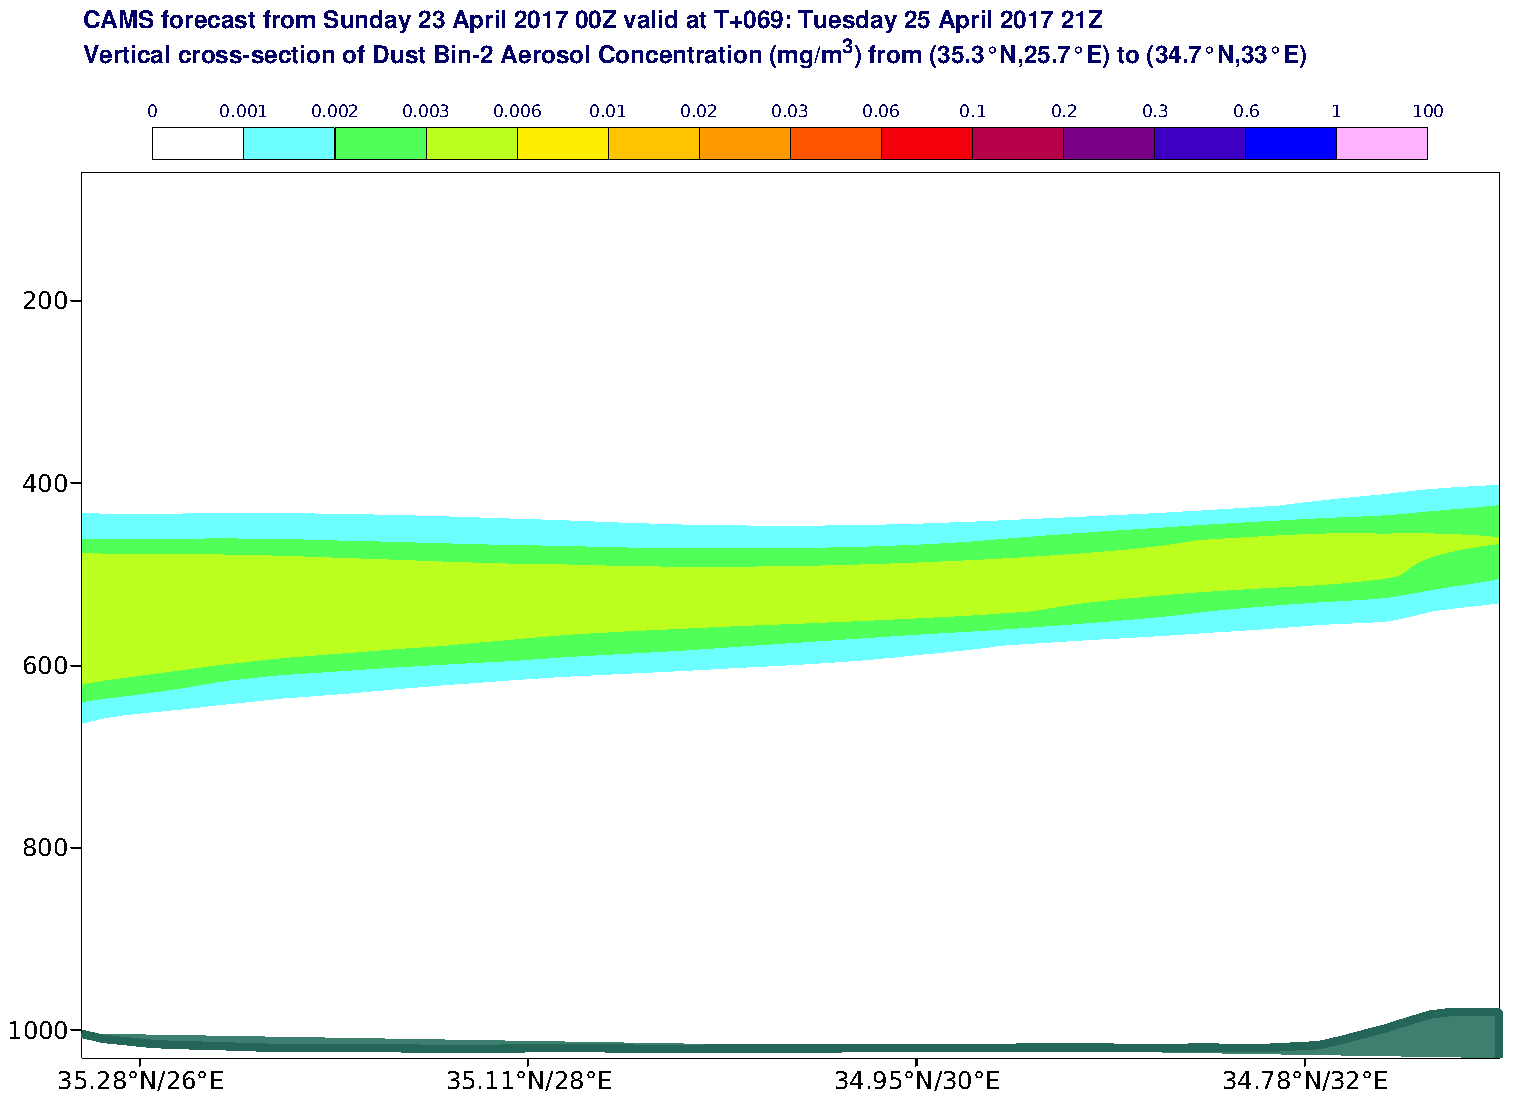 Vertical cross-section of Dust Bin-2 Aerosol Concentration (mg/m3) valid at T69 - 2017-04-25 21:00